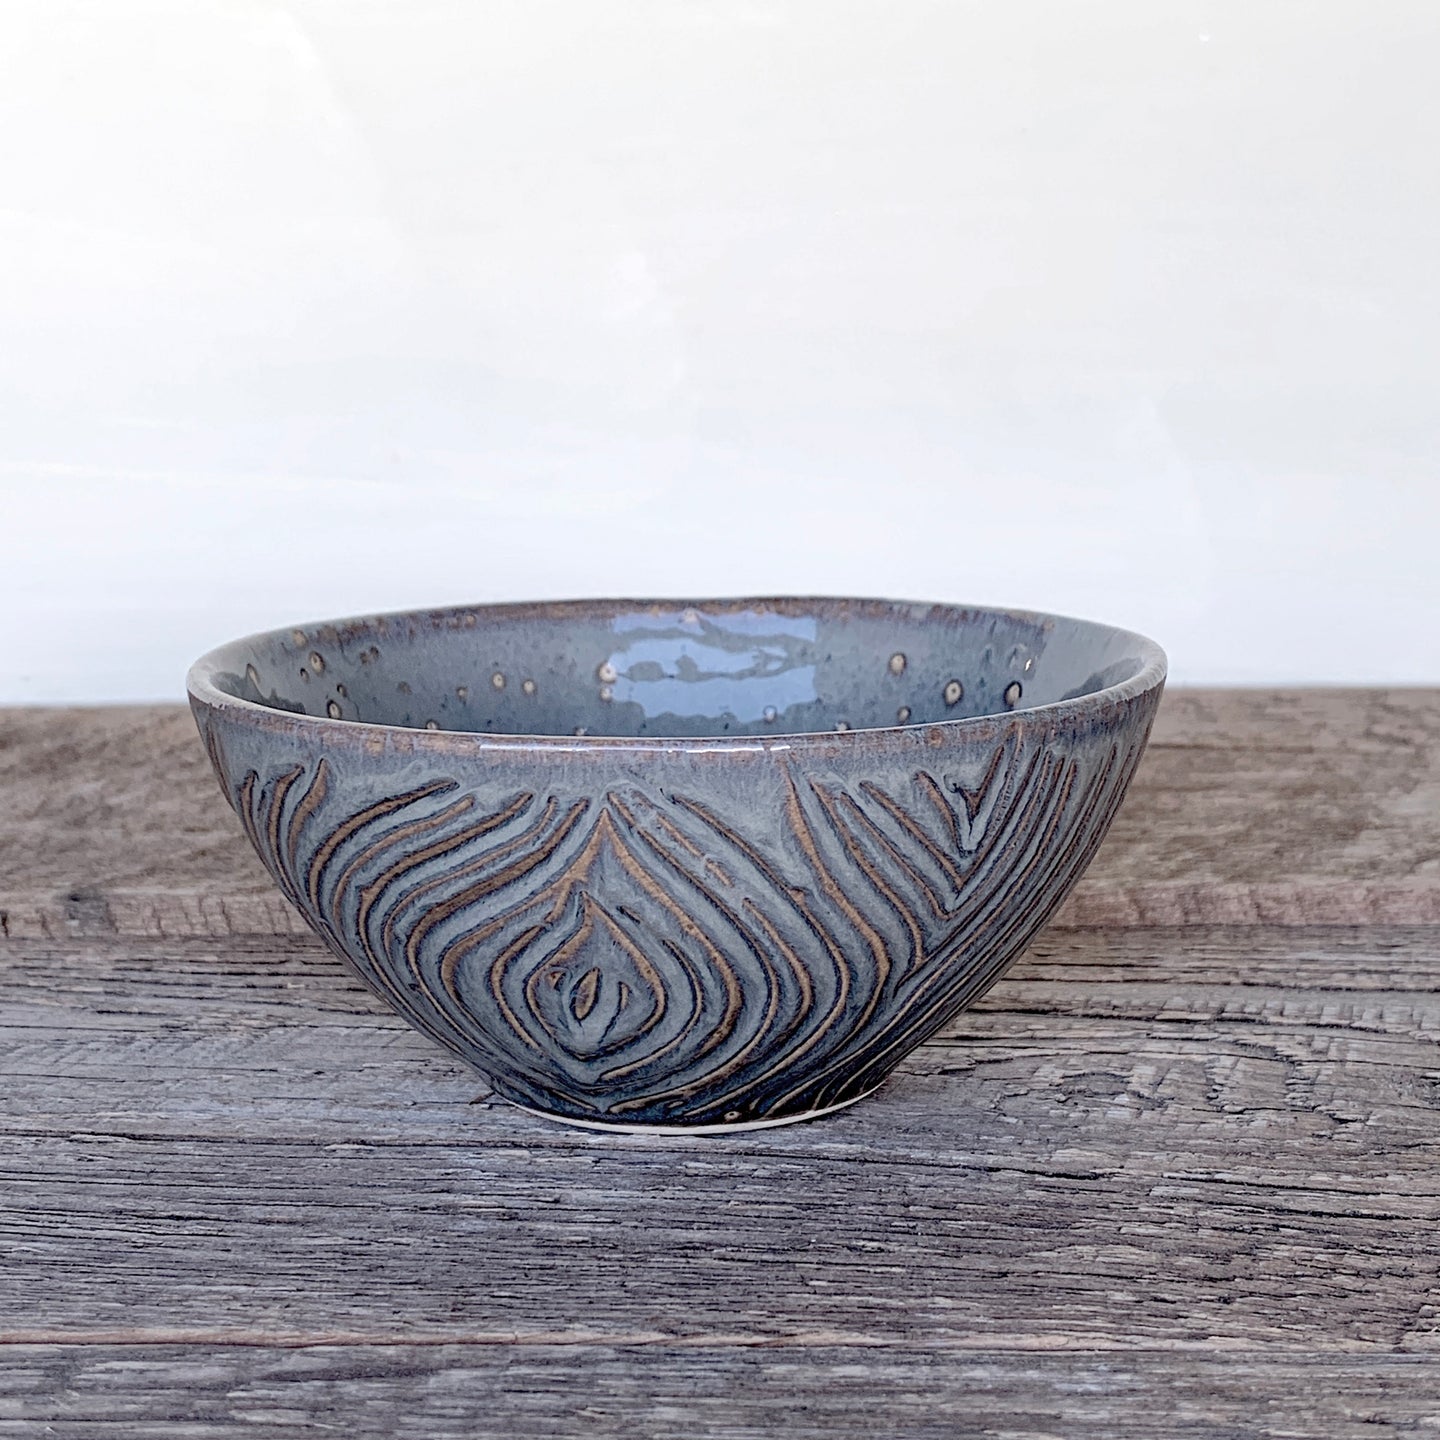 SLATE SMALL EVERYDAY BOWLS WITH CARVED WOOD GRAIN